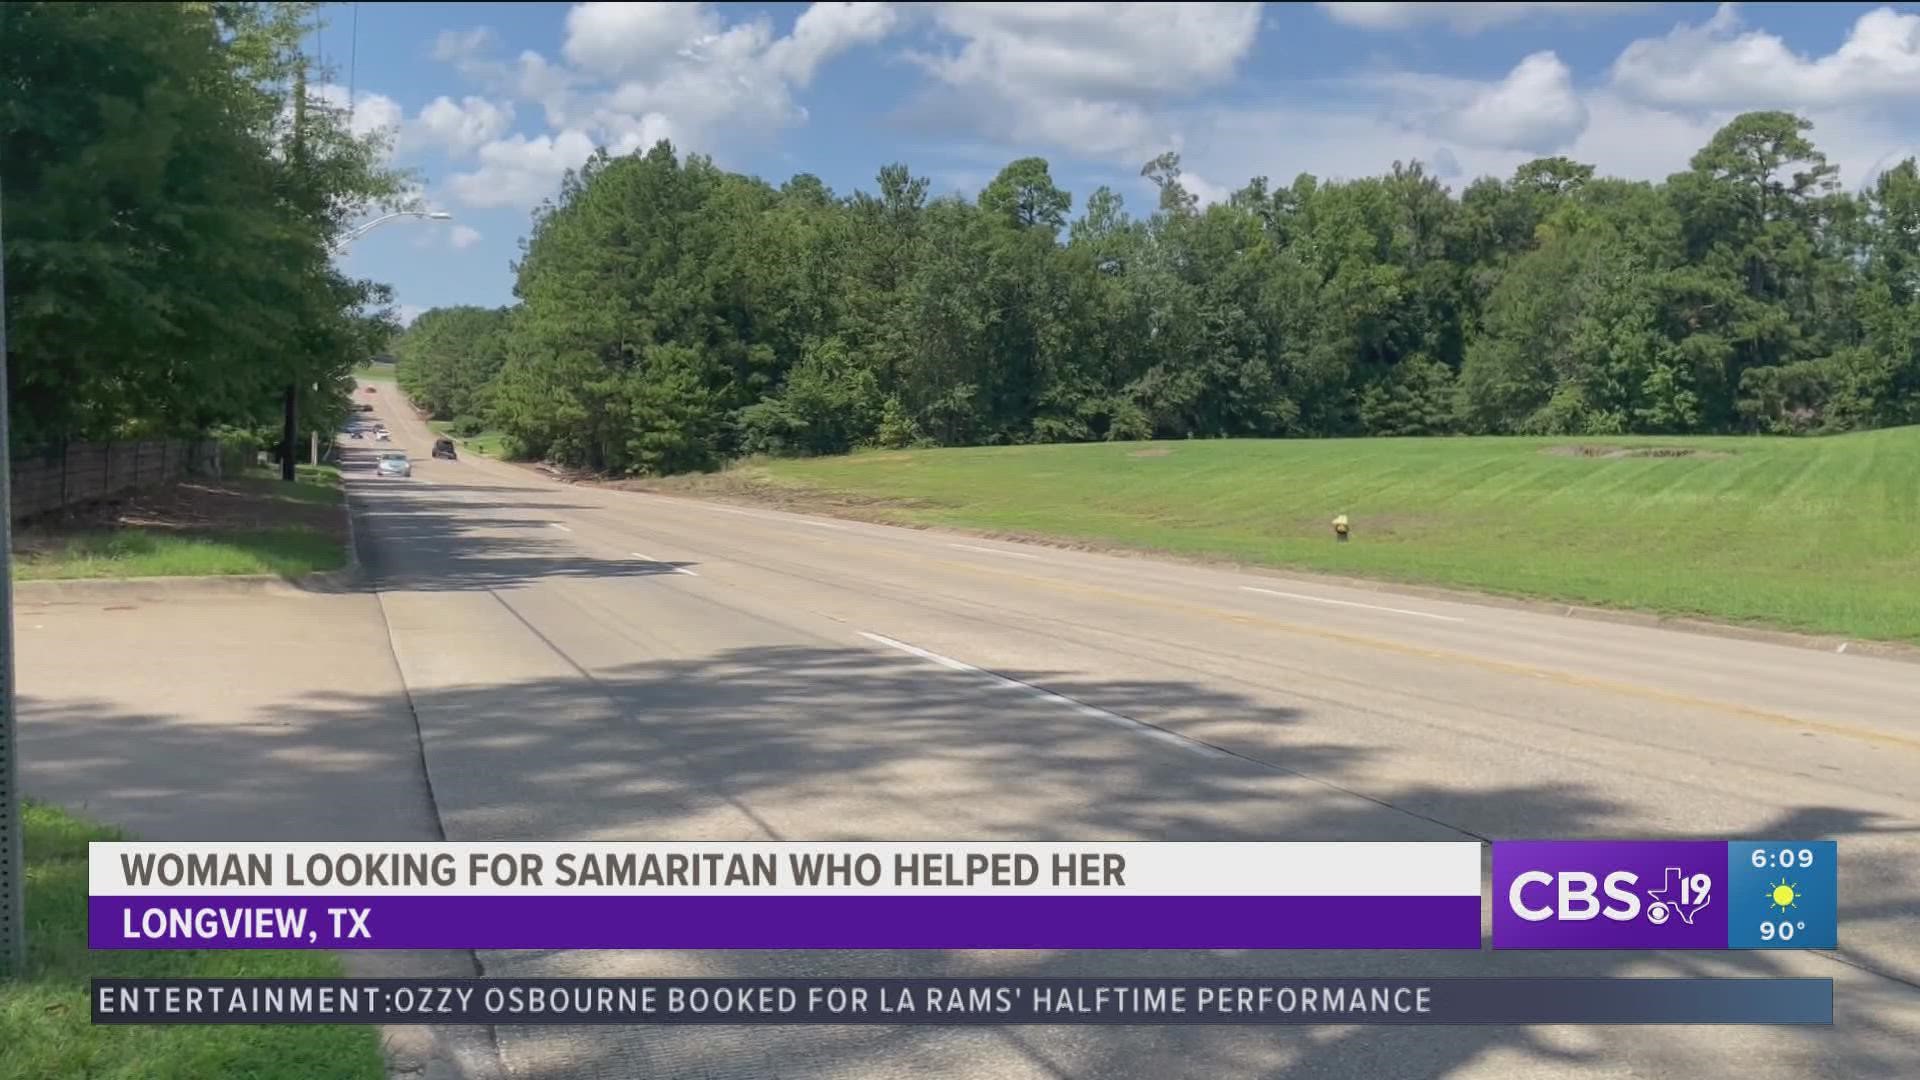 A woman in Longview suffered a tragic wreck earlier this summer. Now she’s looking for the woman who stuck by her side.